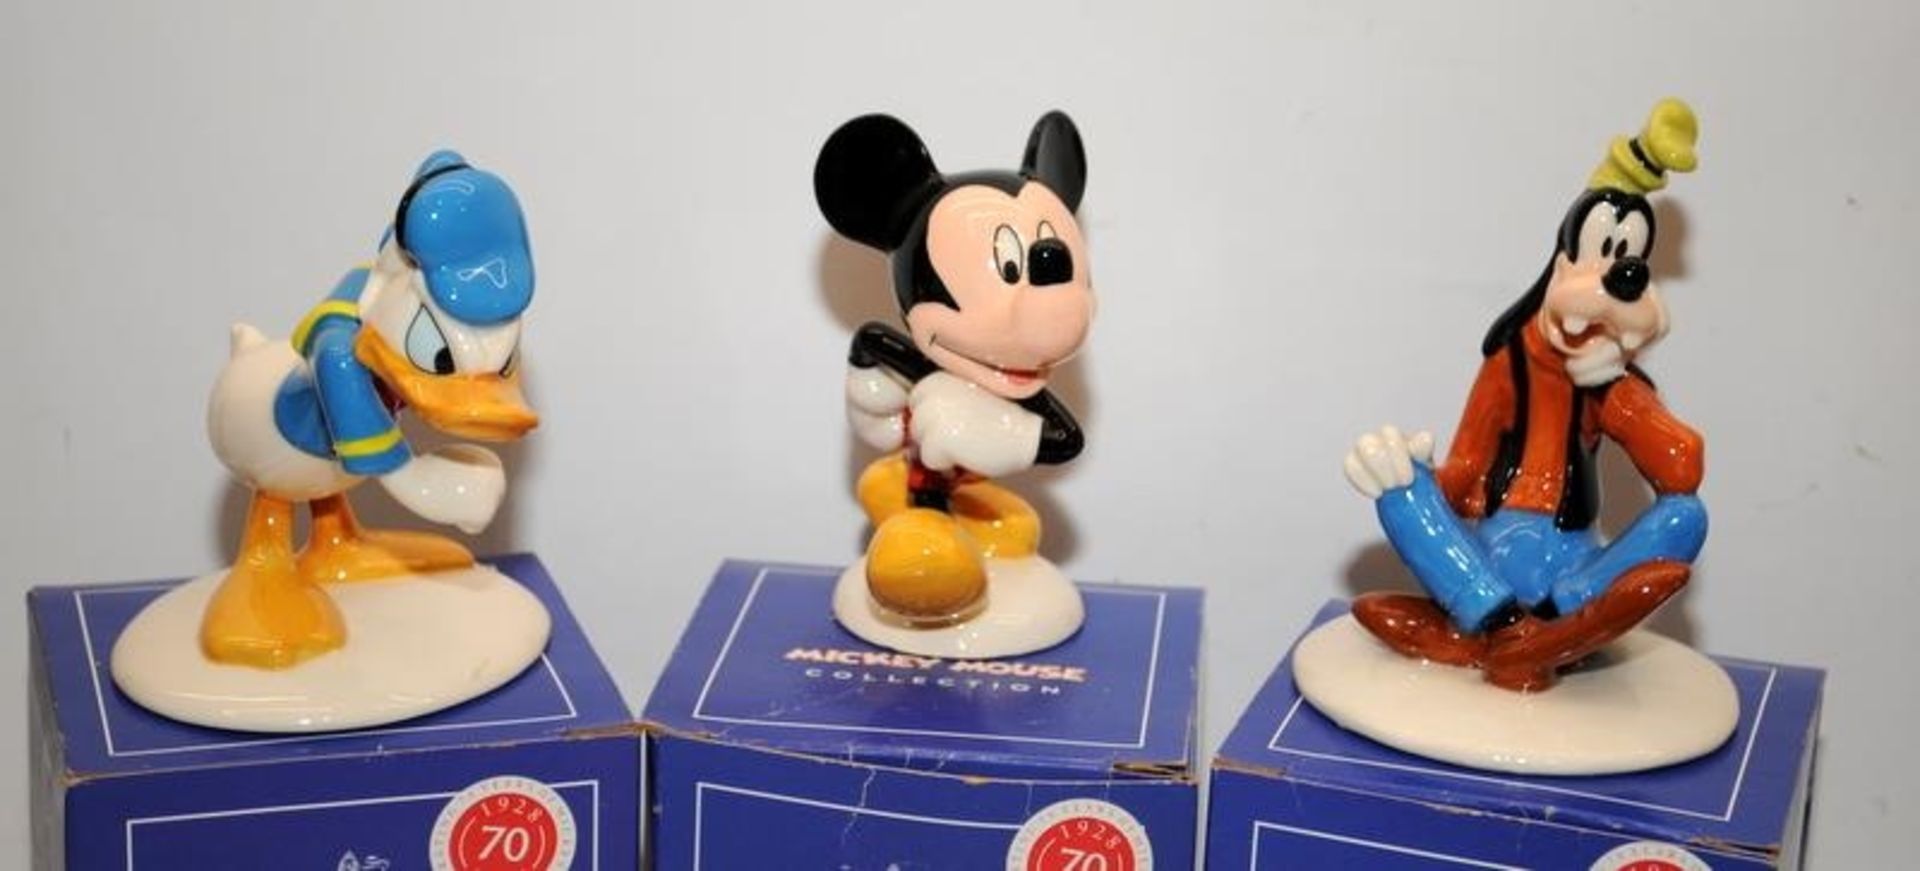 Royal Doulton Mickey Mouse 70th Anniversary Collection. Complete set of all 6 figures, boxed - Image 2 of 3